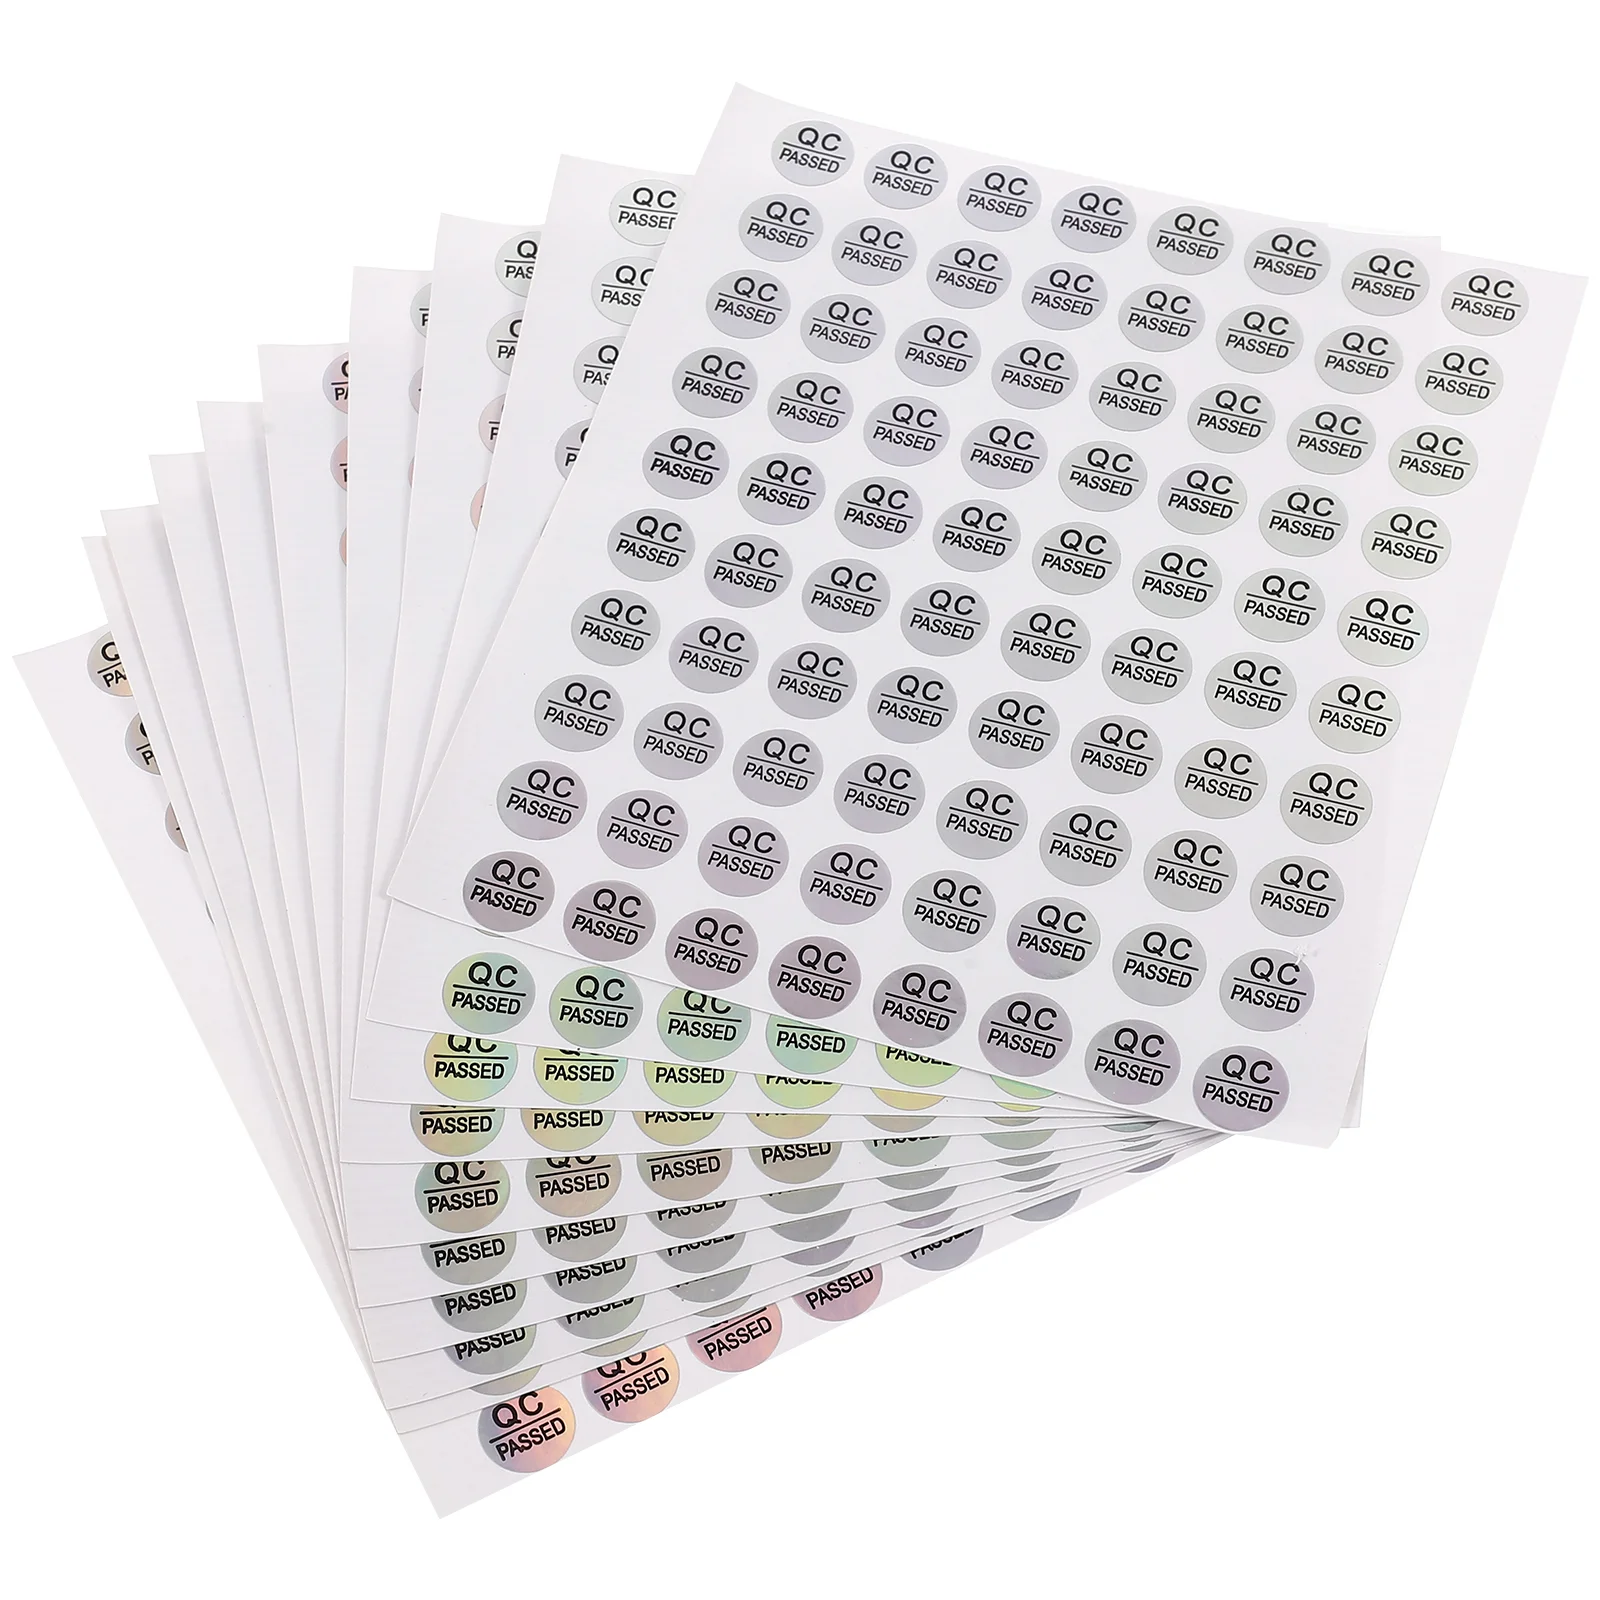 

800 Pcs Qc Pass Tag Colored Stickers Label Warehouse Tested Tags Pvc Self-adhesive Status Passed Labels Convenient